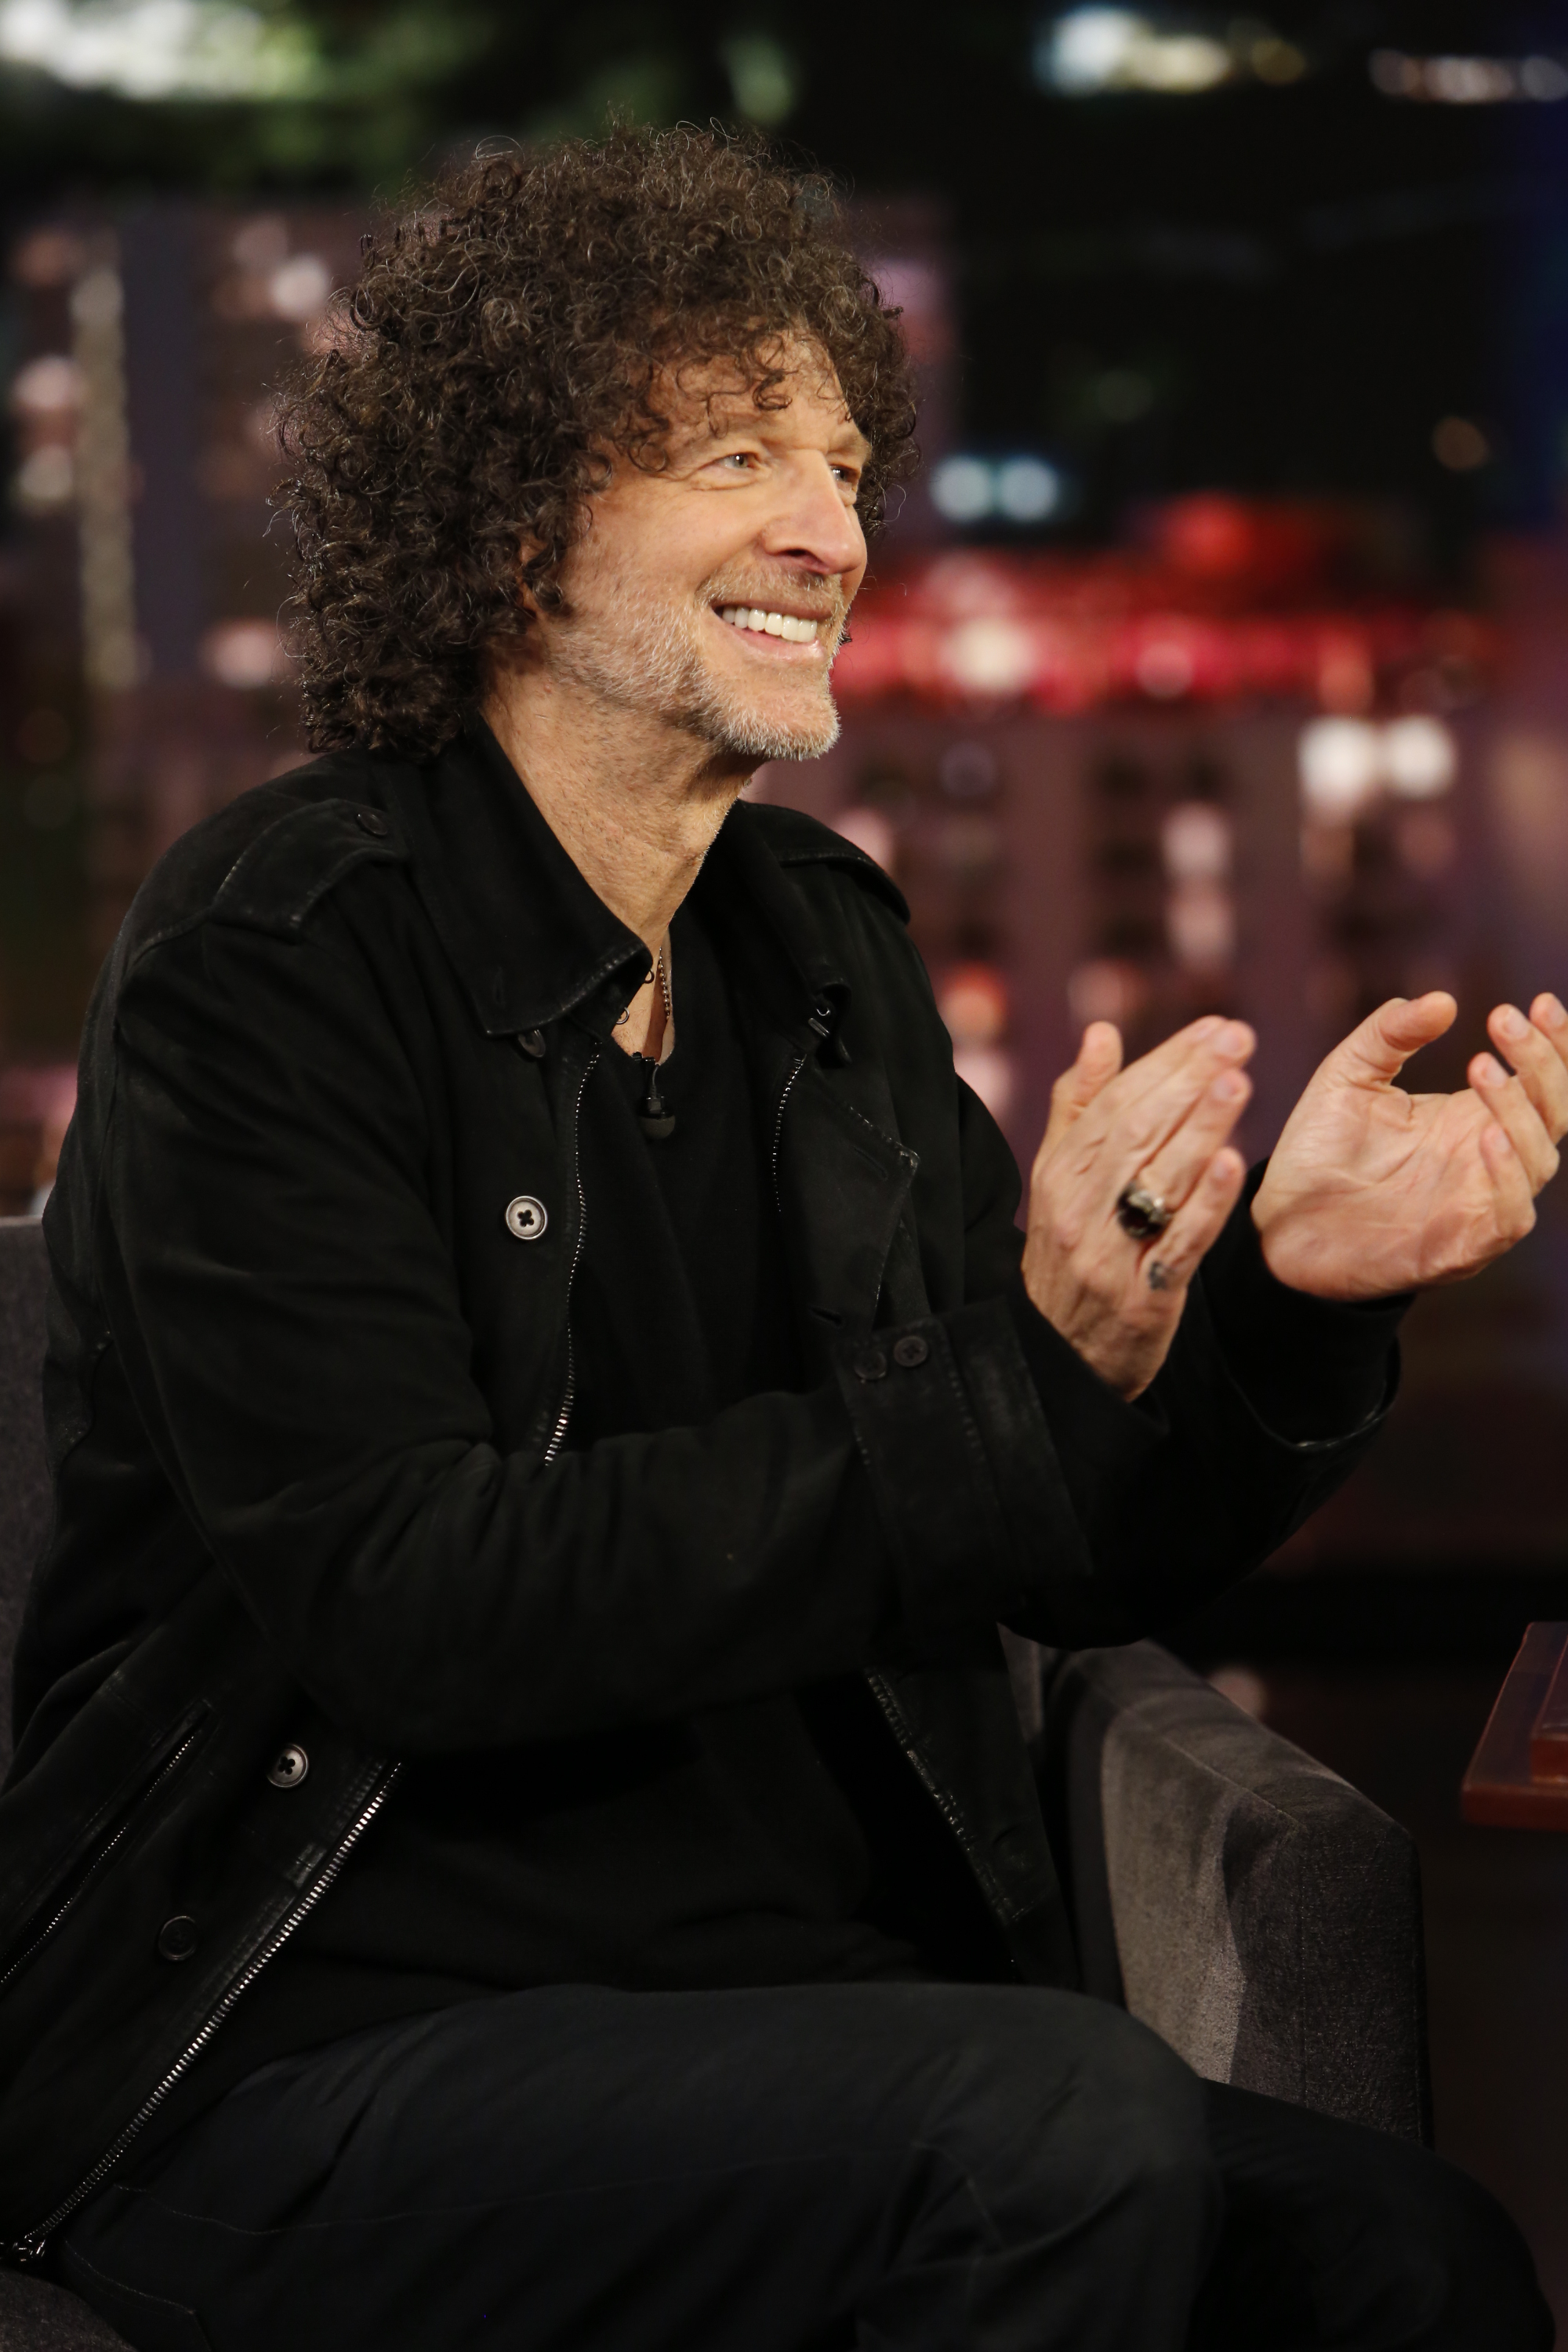 Howard Stern on season 17 of "Jimmy Kimmel Live!" on October 10, 2019 | Source: Getty Images